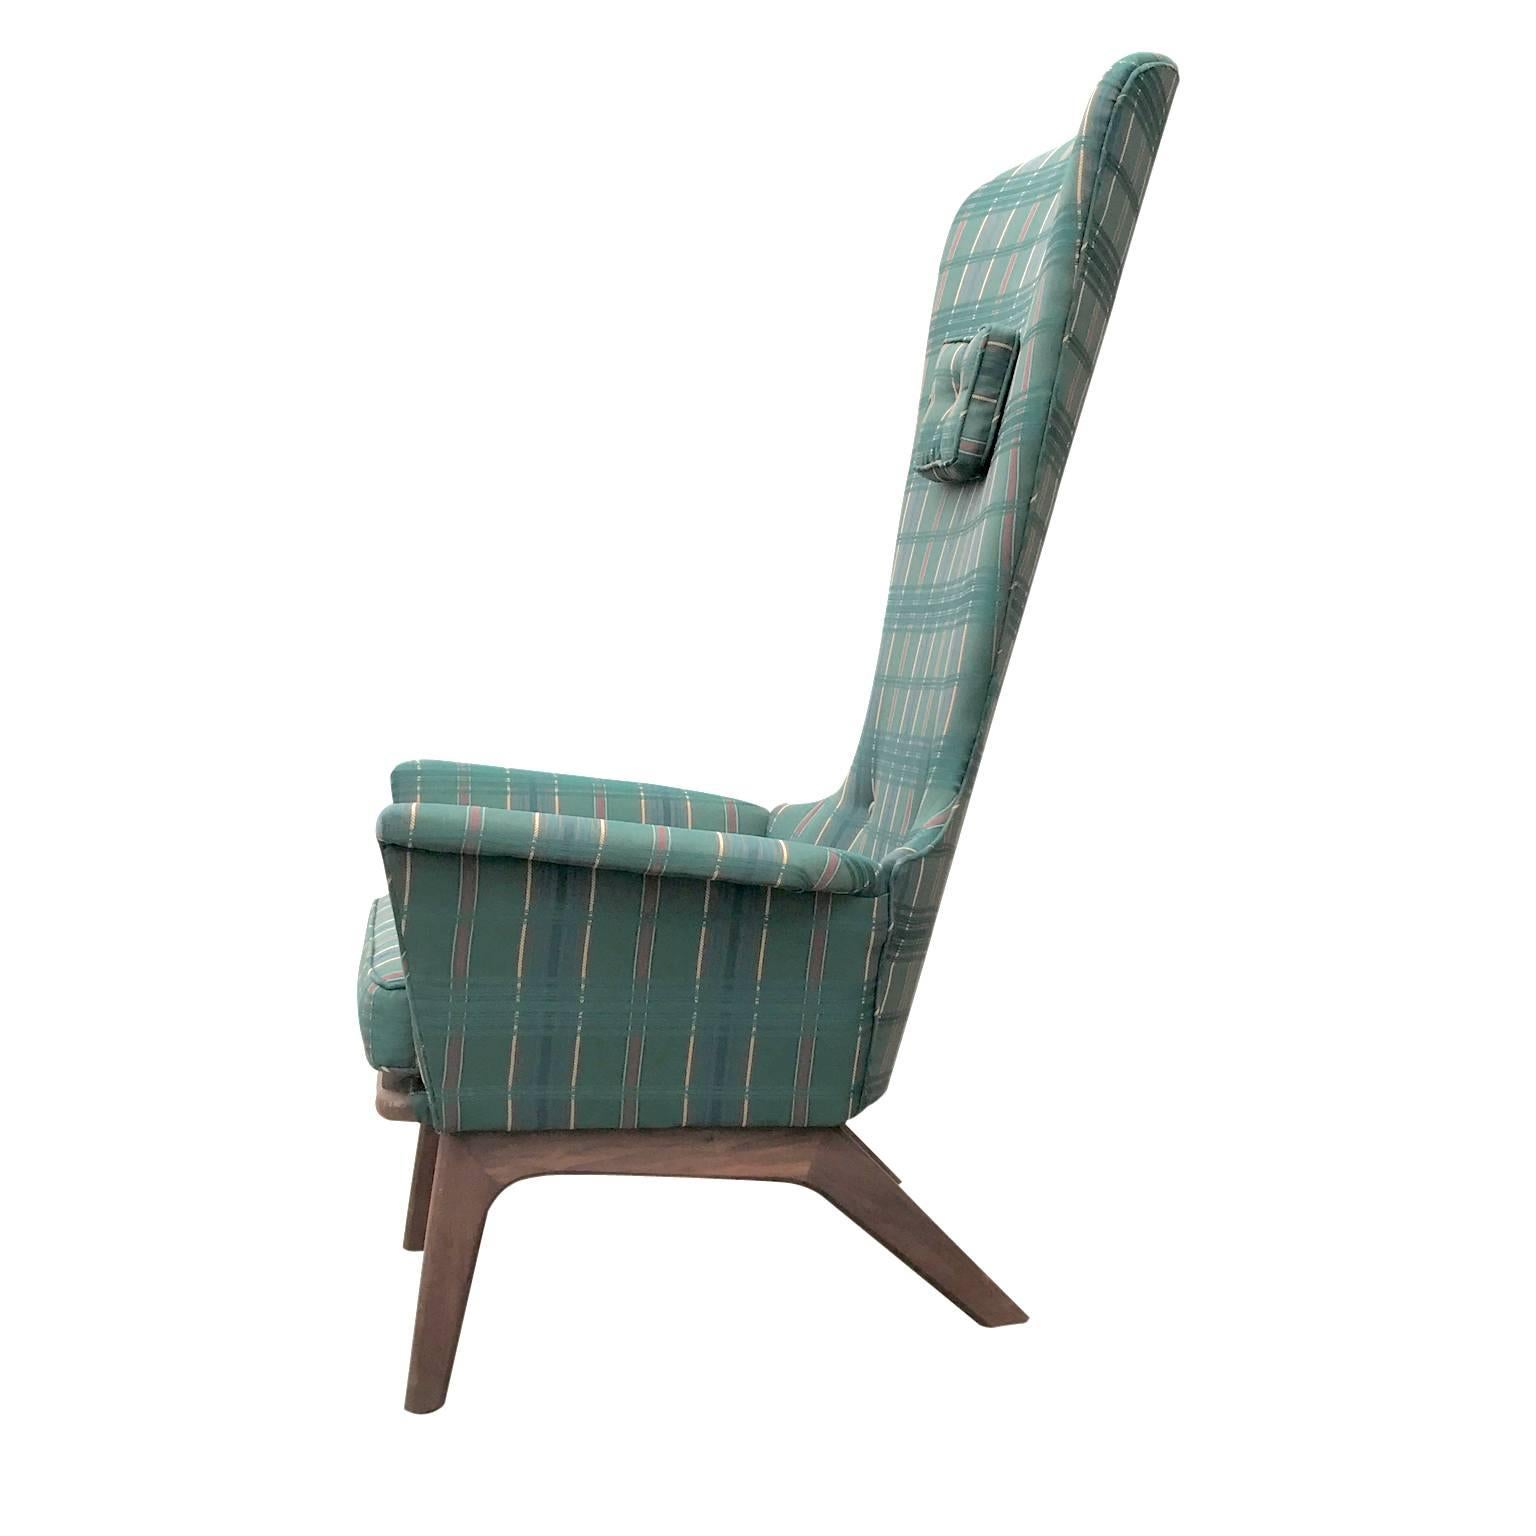 Great Adrian Pearsall highback lounge chair in vintage condition. This chair was made in the 1960s and is model 1534-C. Made by Craft Associates. Reupholstery recommended.